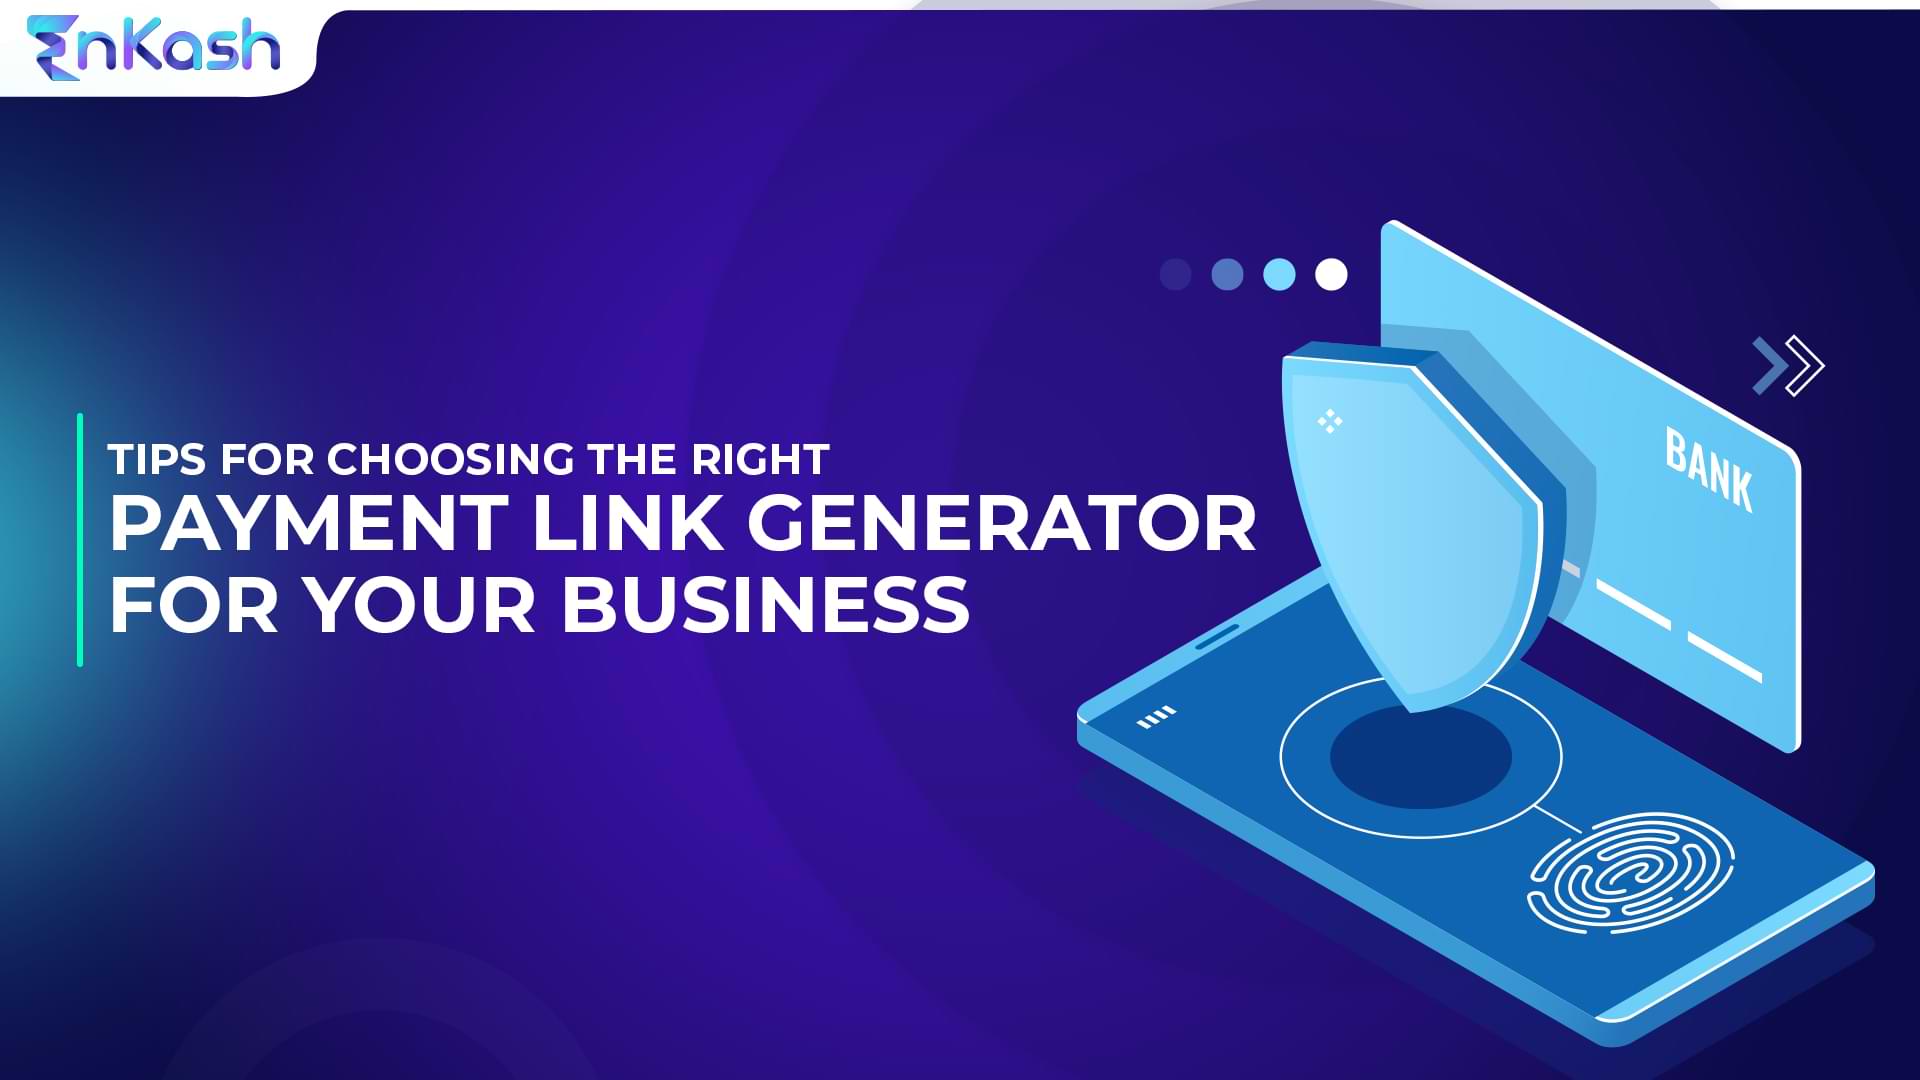 Tips for Choosing the Right Payment Link Generator for Your Business